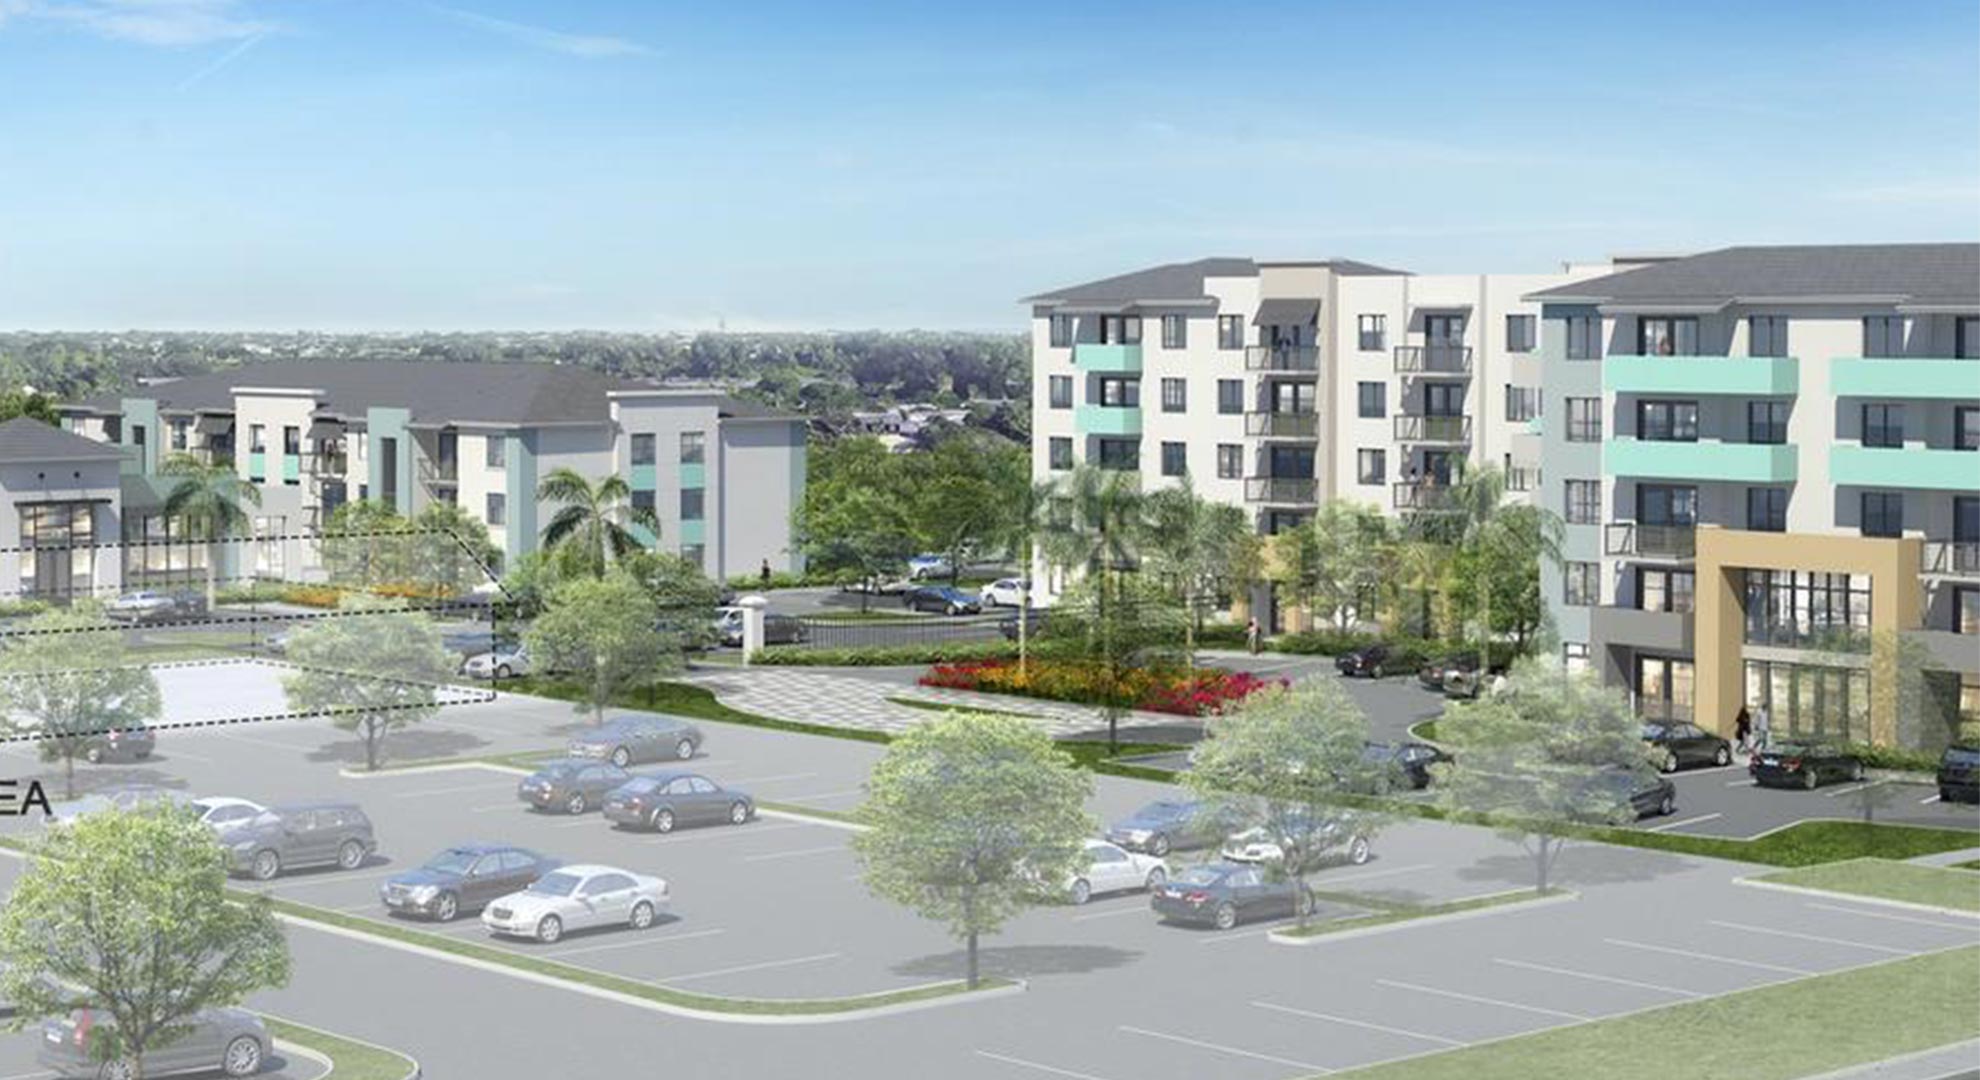 Prospect Real Estate Development Group to partner with Midtown Capital on $45M 240-unit apartment building in Lake Worth, Fla.